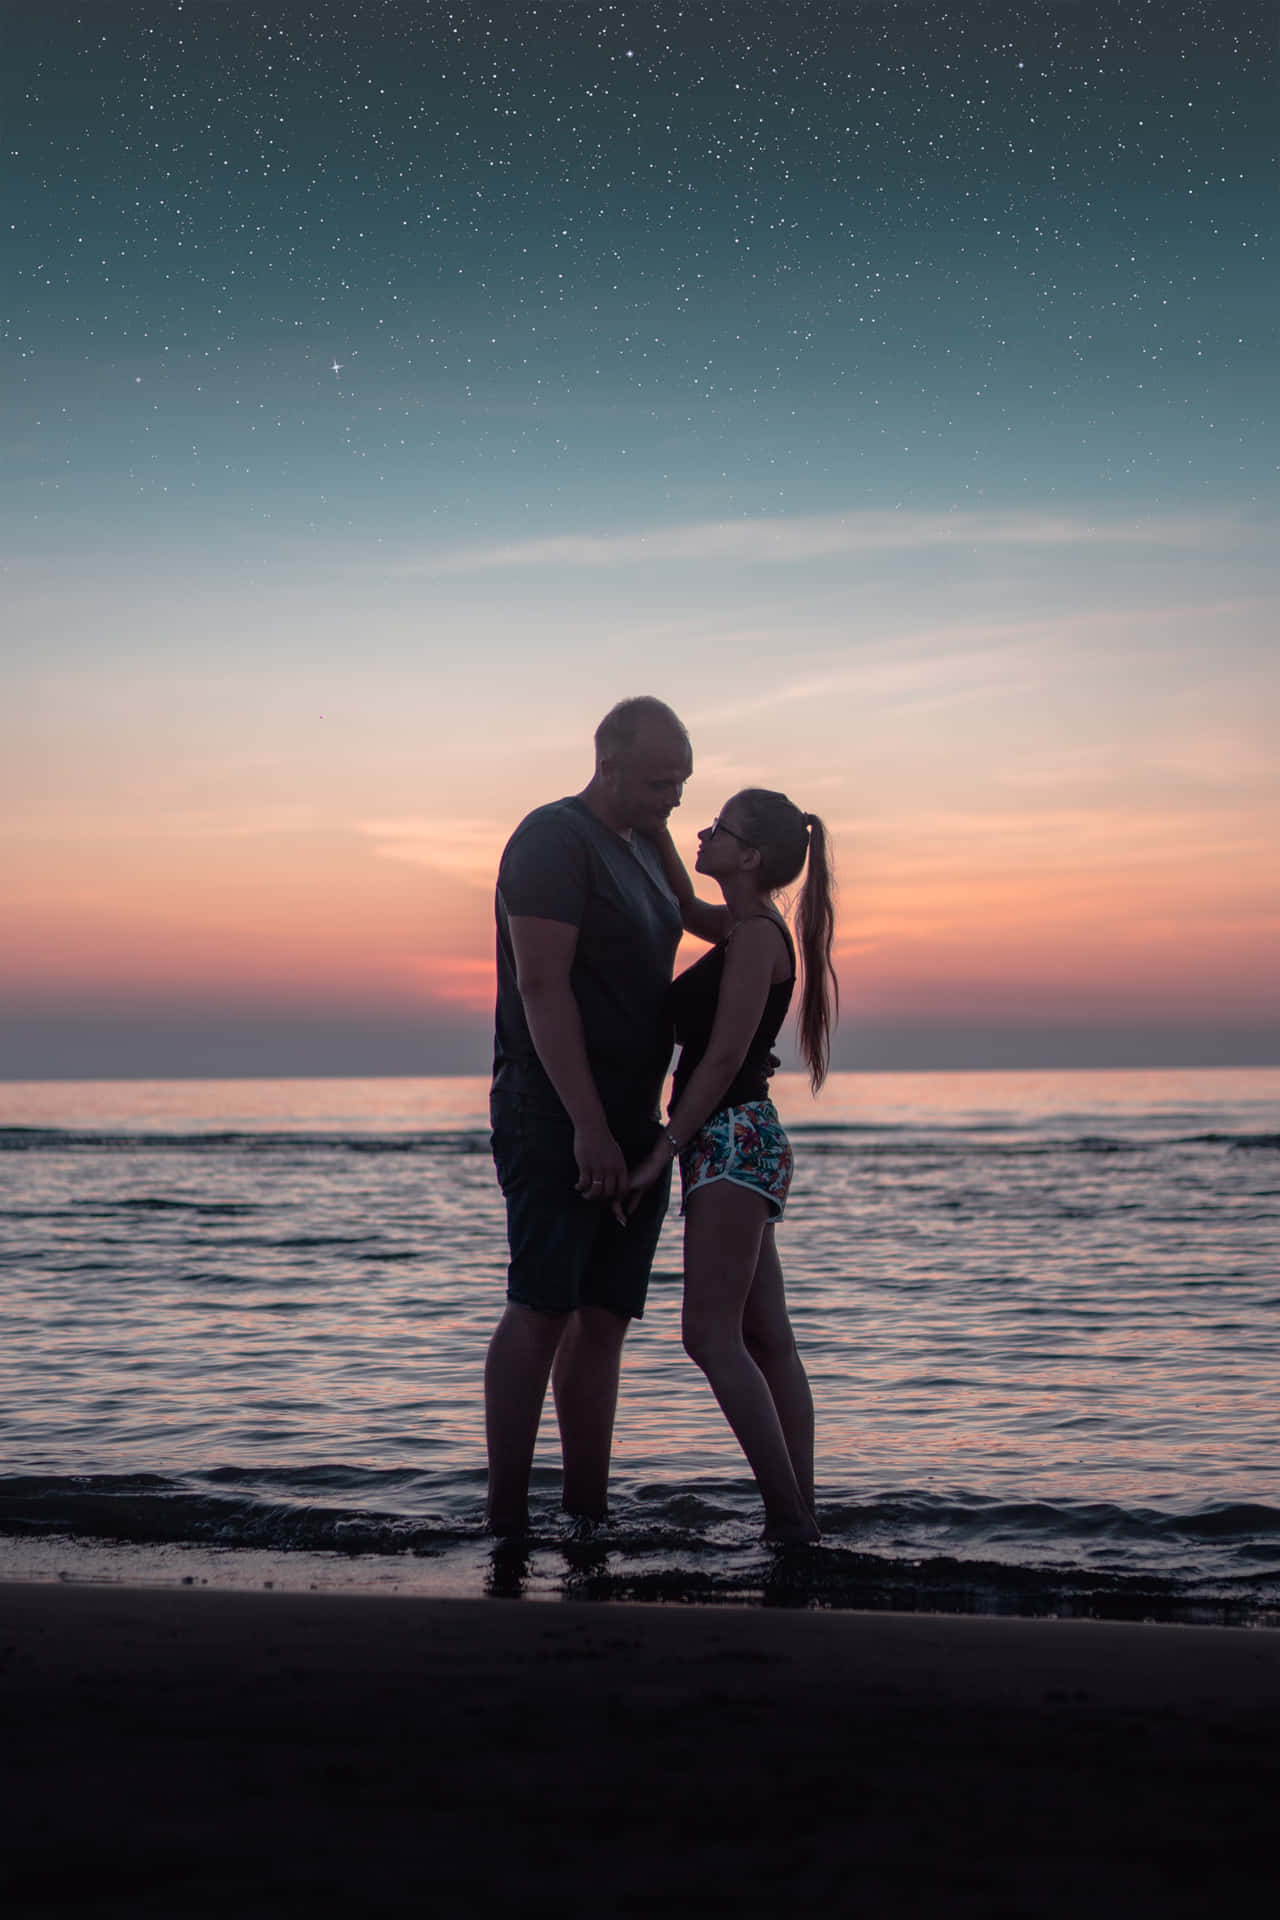 Couple Sunset On Beach With Ocean View Picture